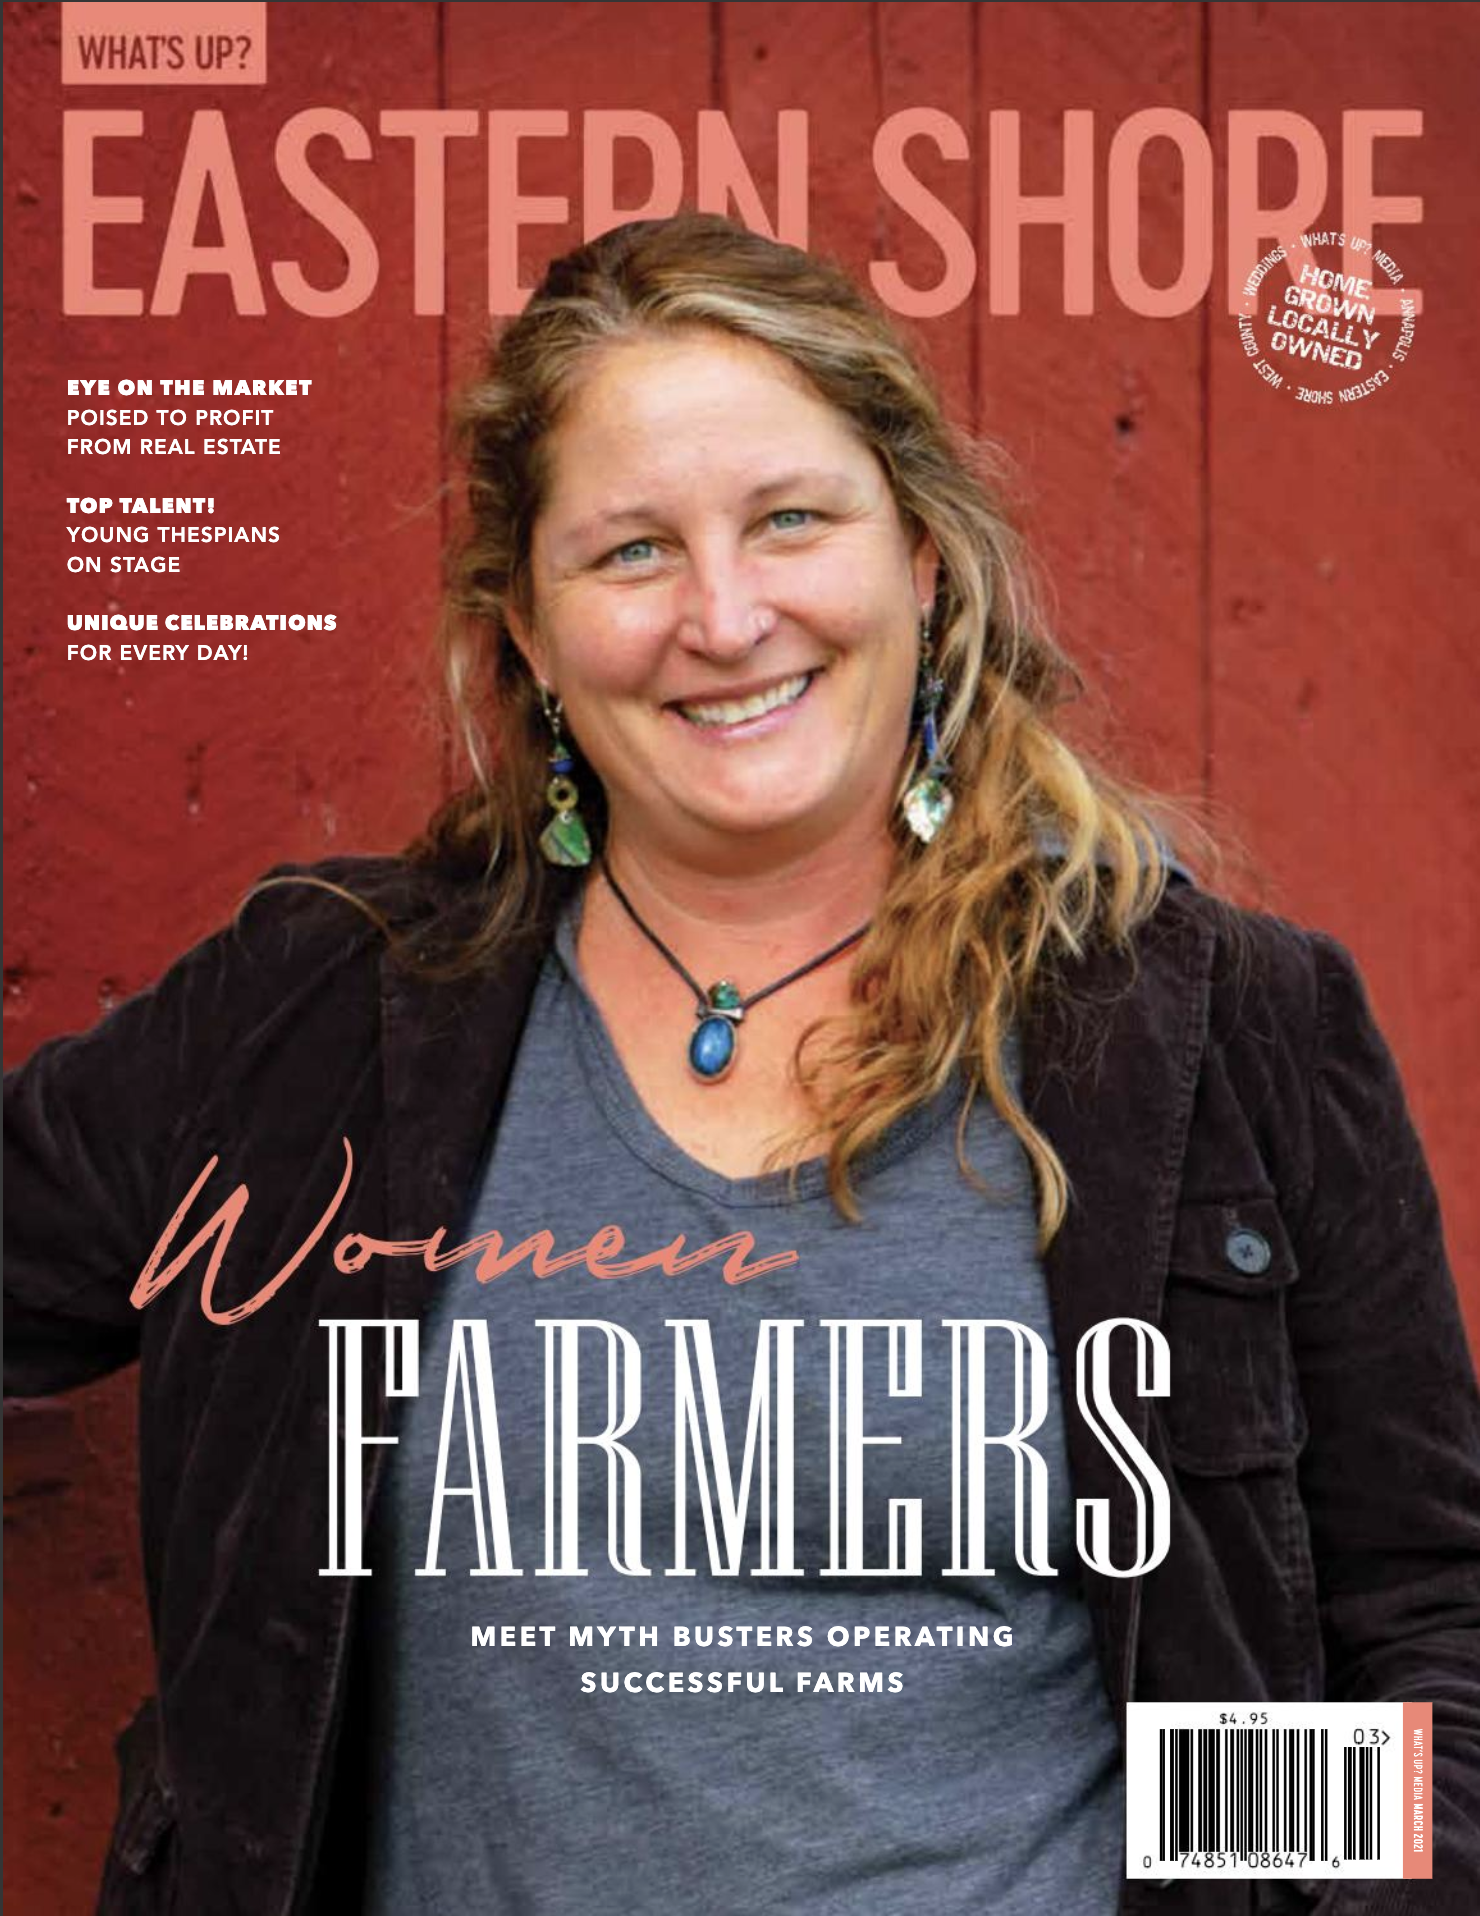 Spirit Grower Featured in What’s Up Eastern Shore Magazine